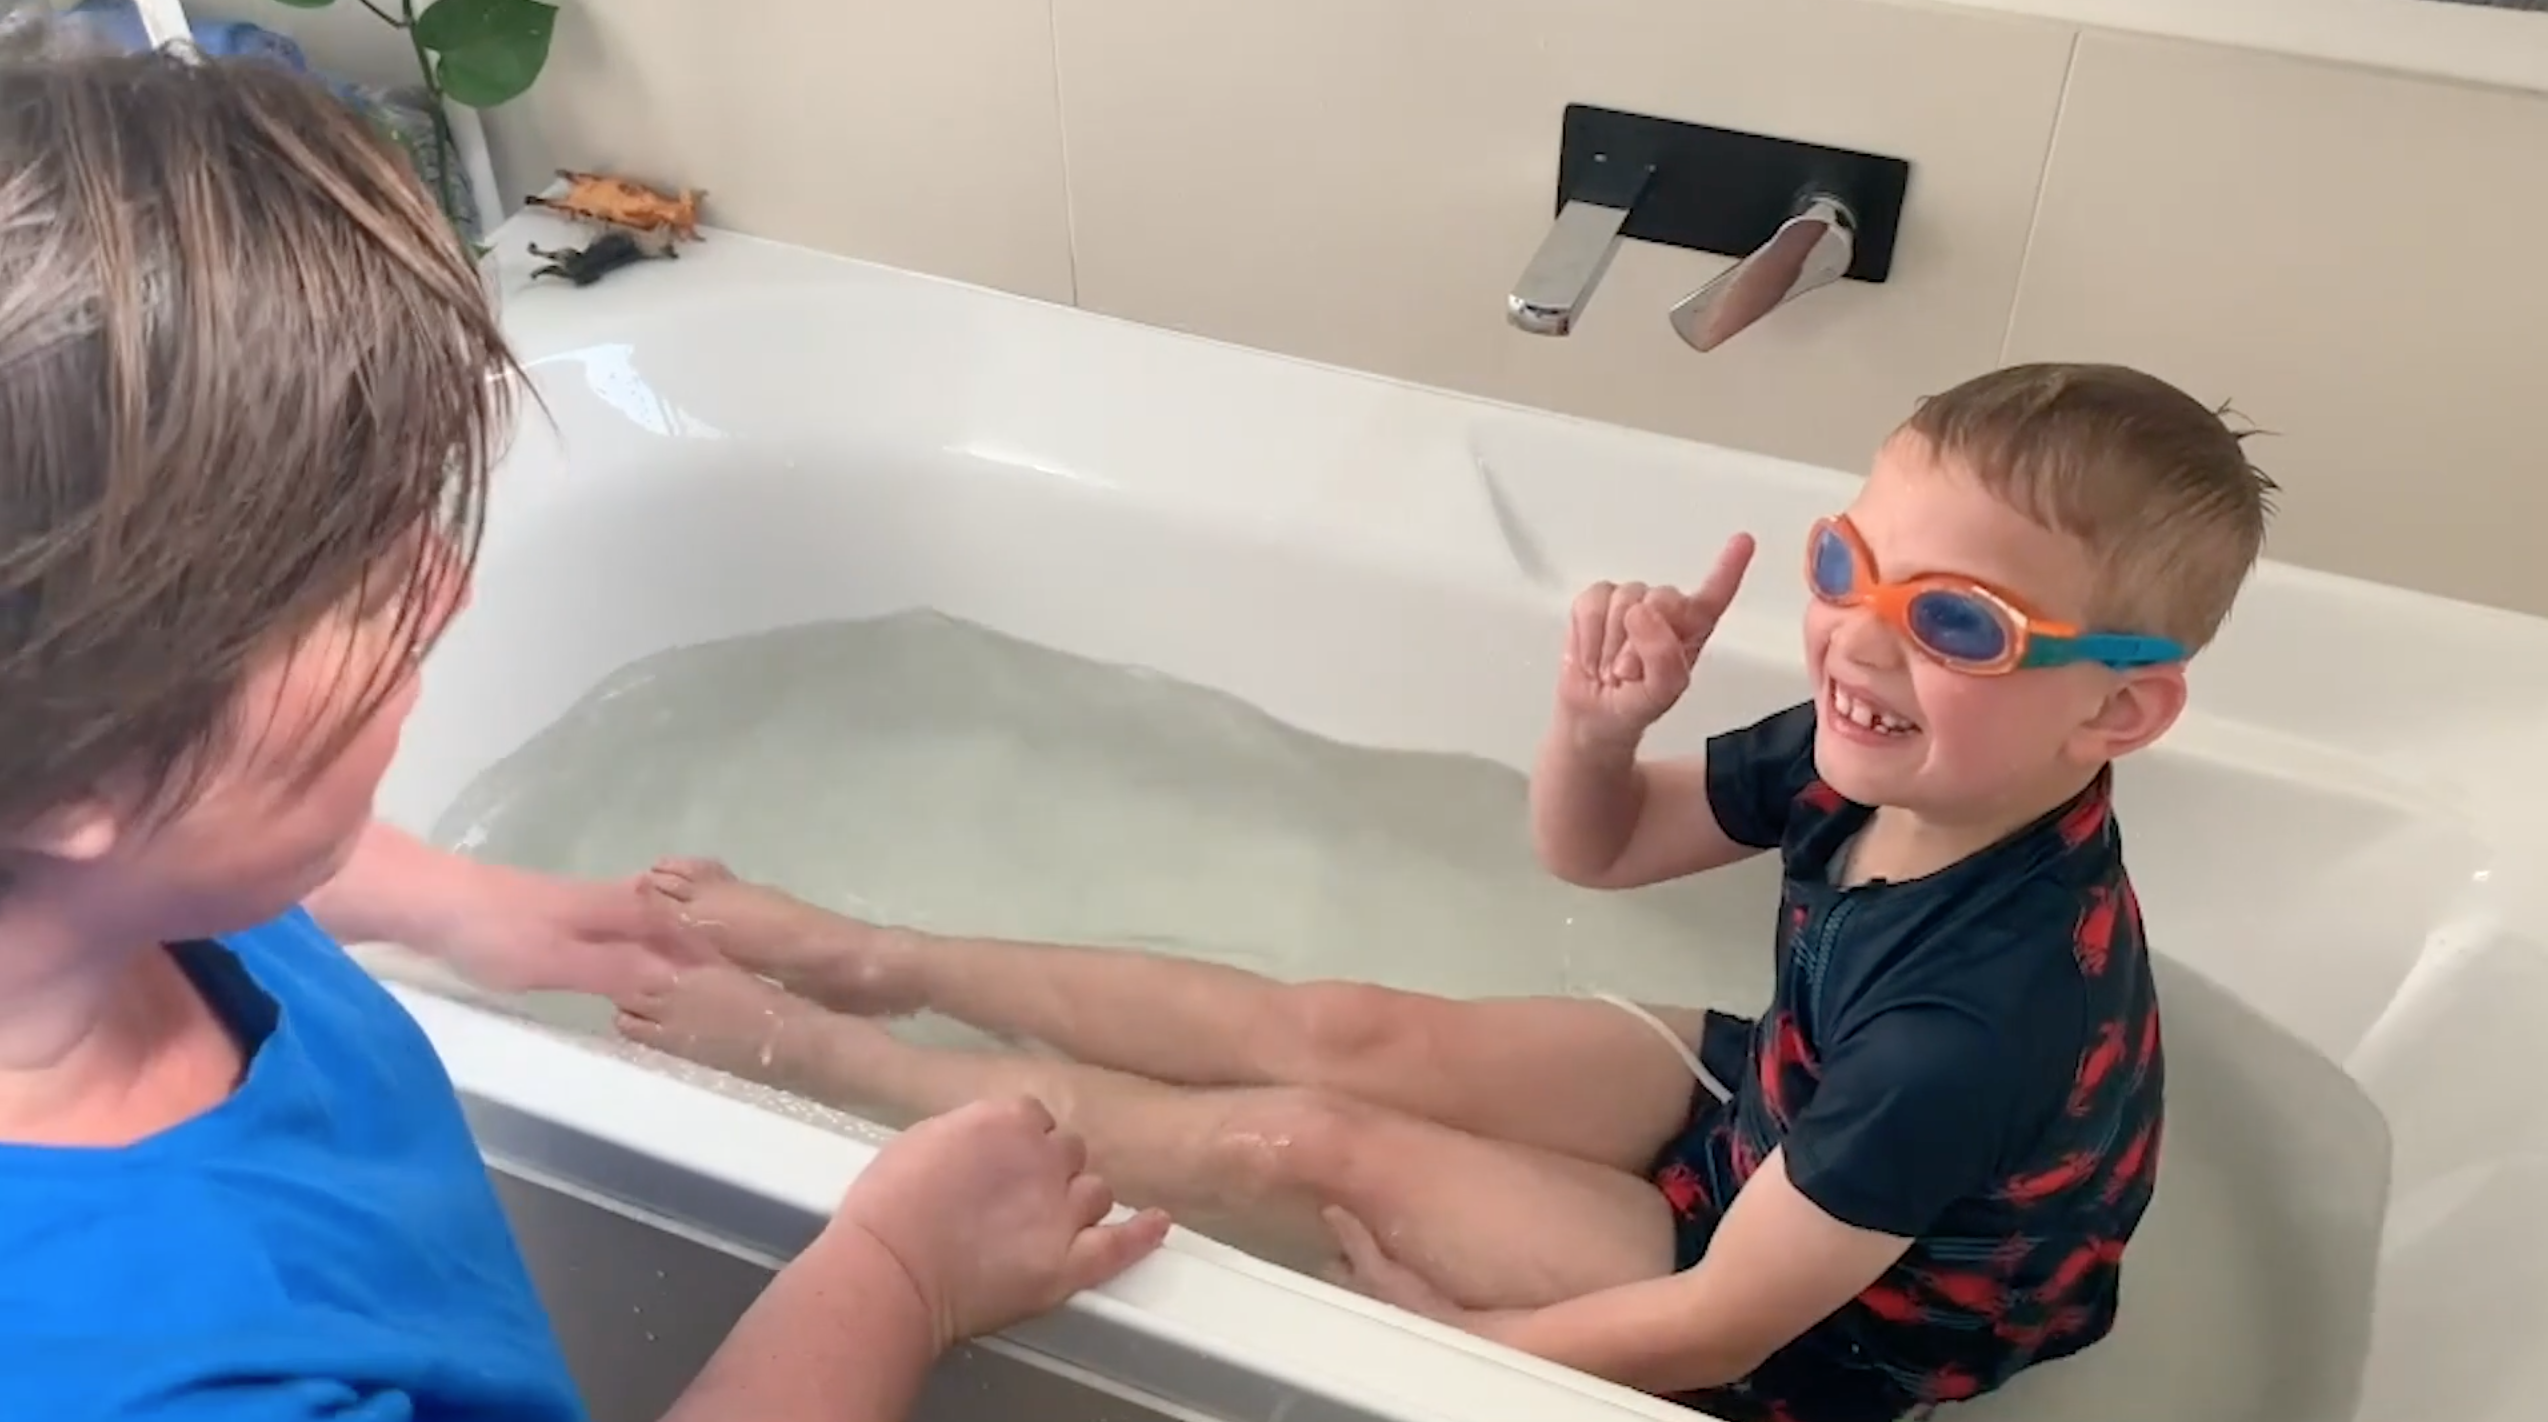 Swimming instructor Anna teaching a young boy how to kick in a bath